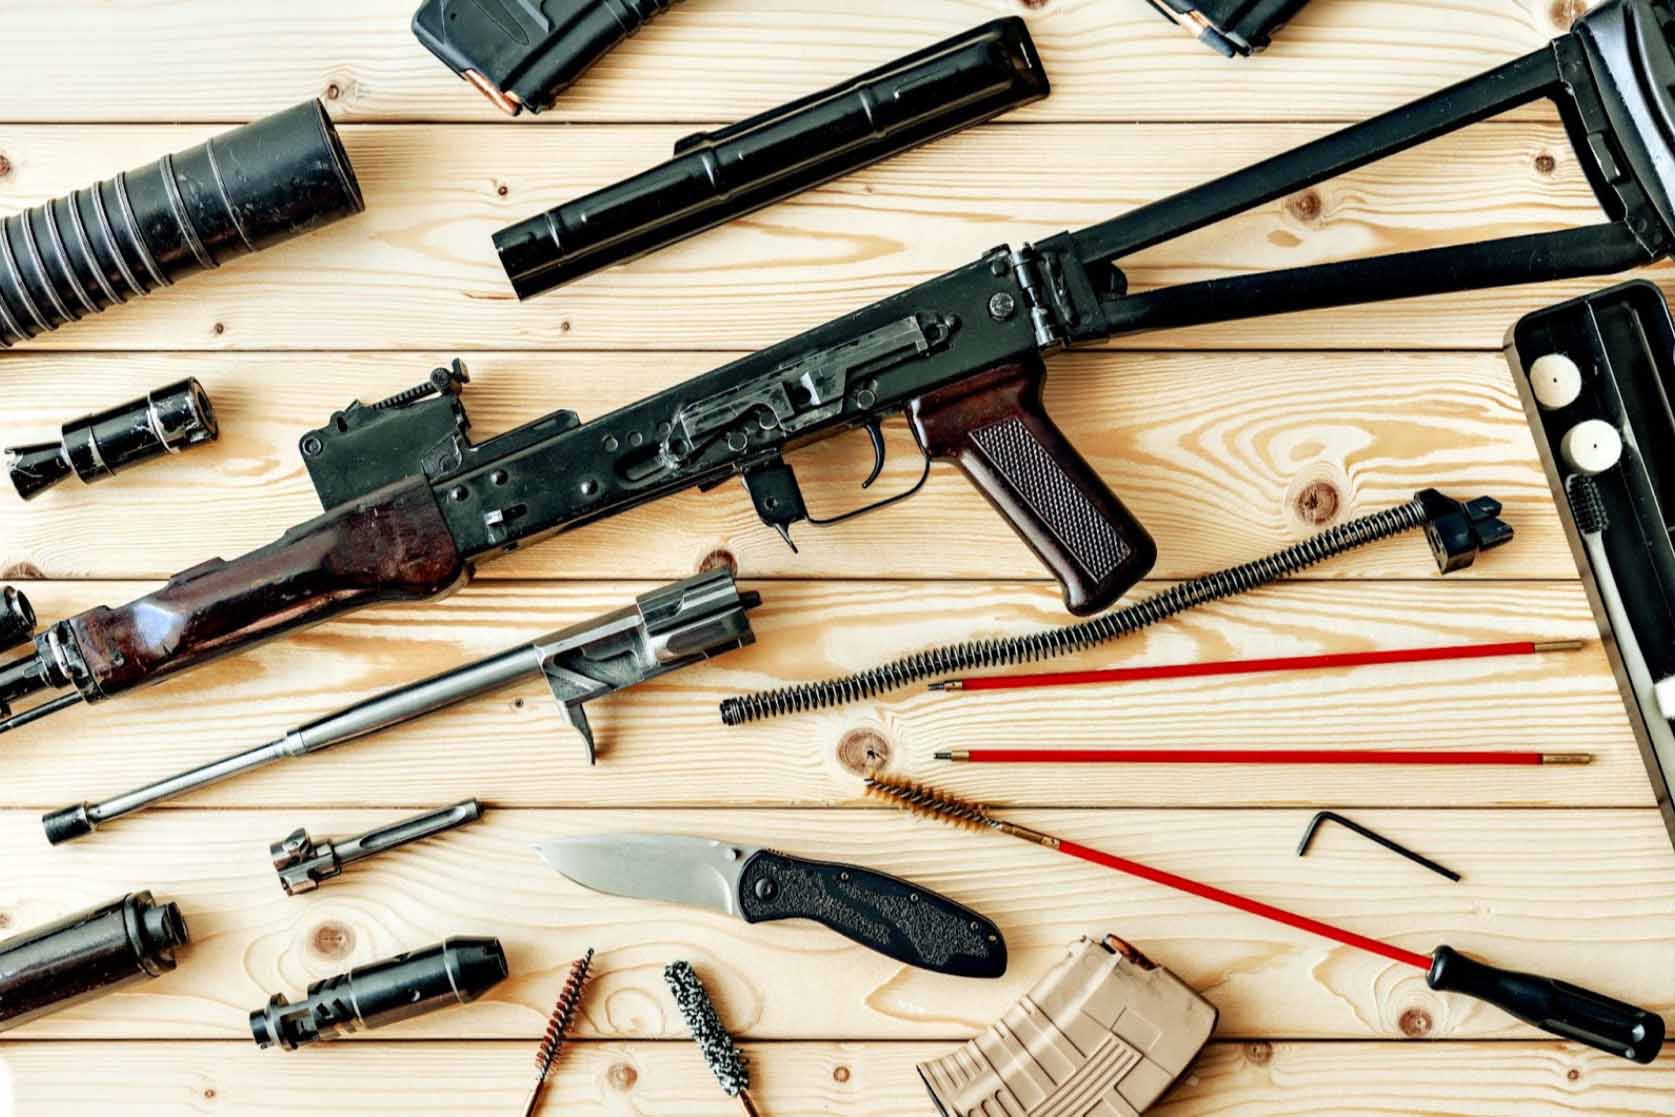 In the close-up shot, a disassembled rifle rests on a table in a weapons workshop, surrounded by various cleaning tools.